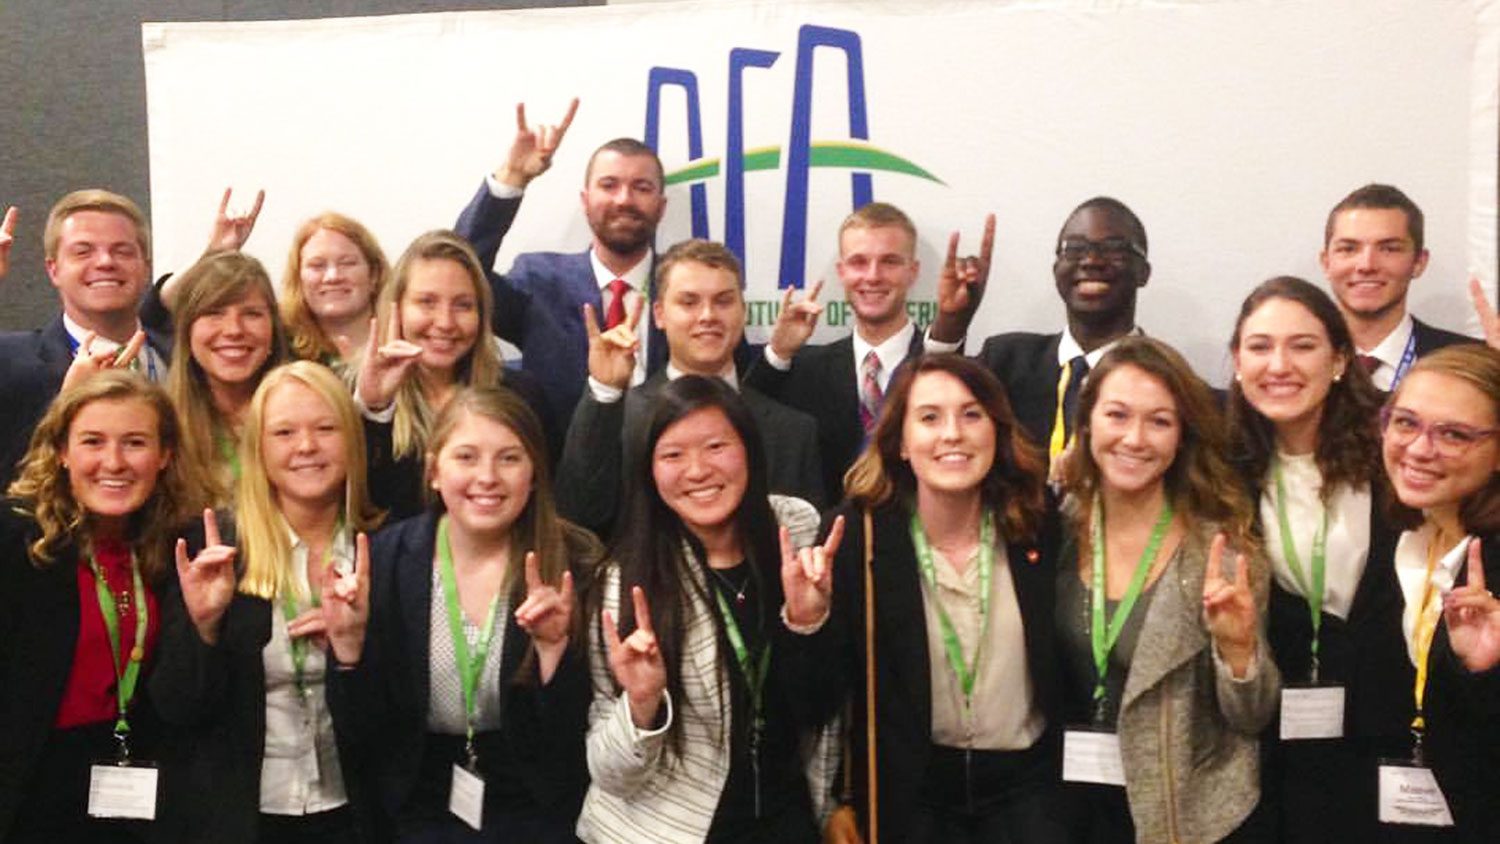 Members of the CALS student delegation at the AFA Leaders Conference.